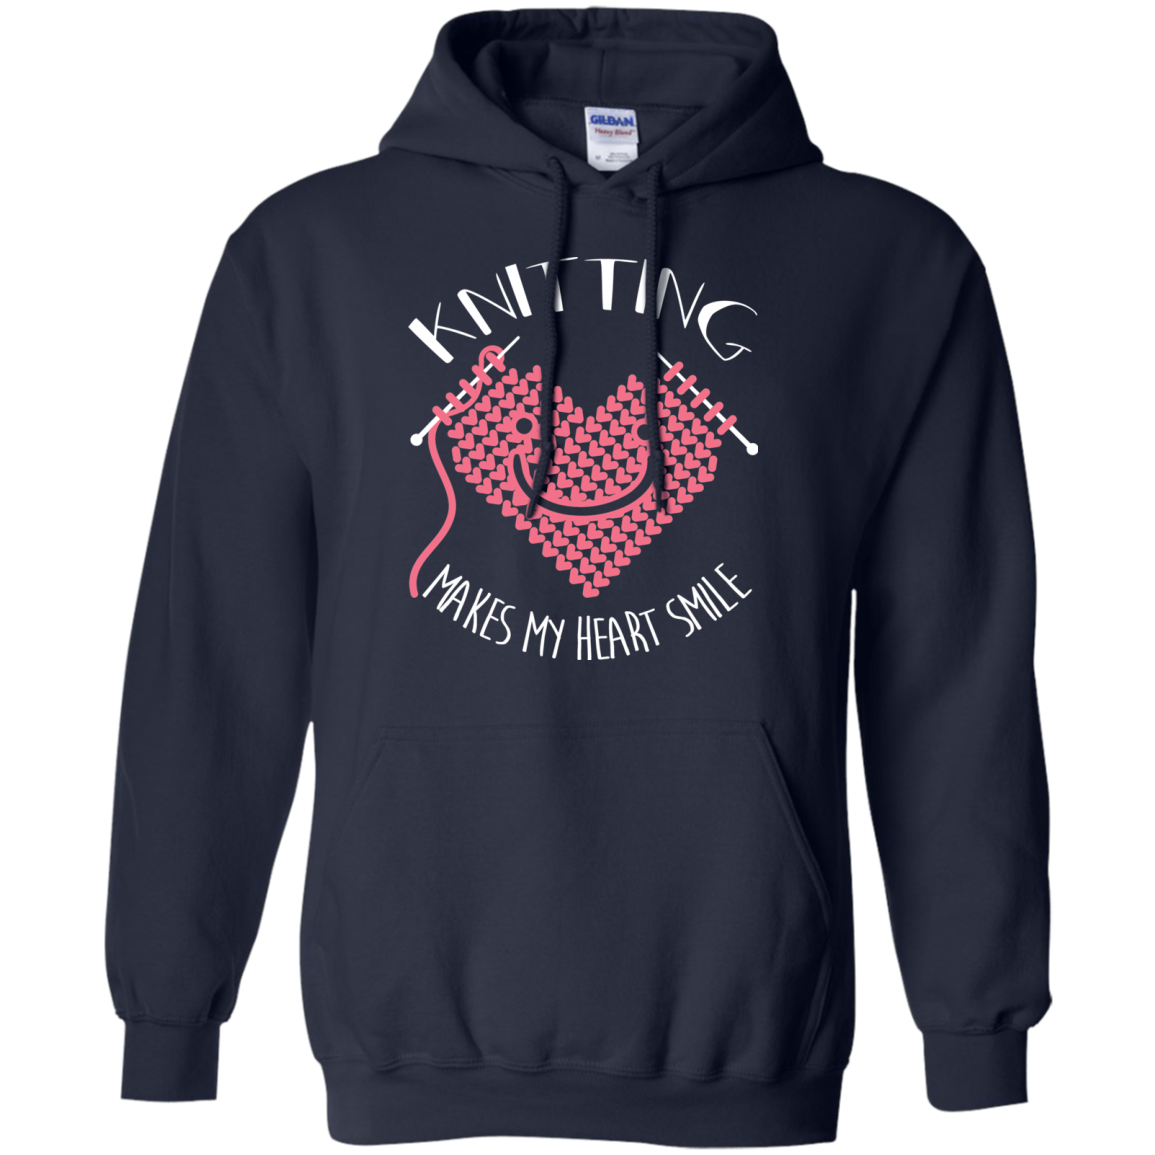 Knitting Makes My Heart Smile Pullover Hoodie